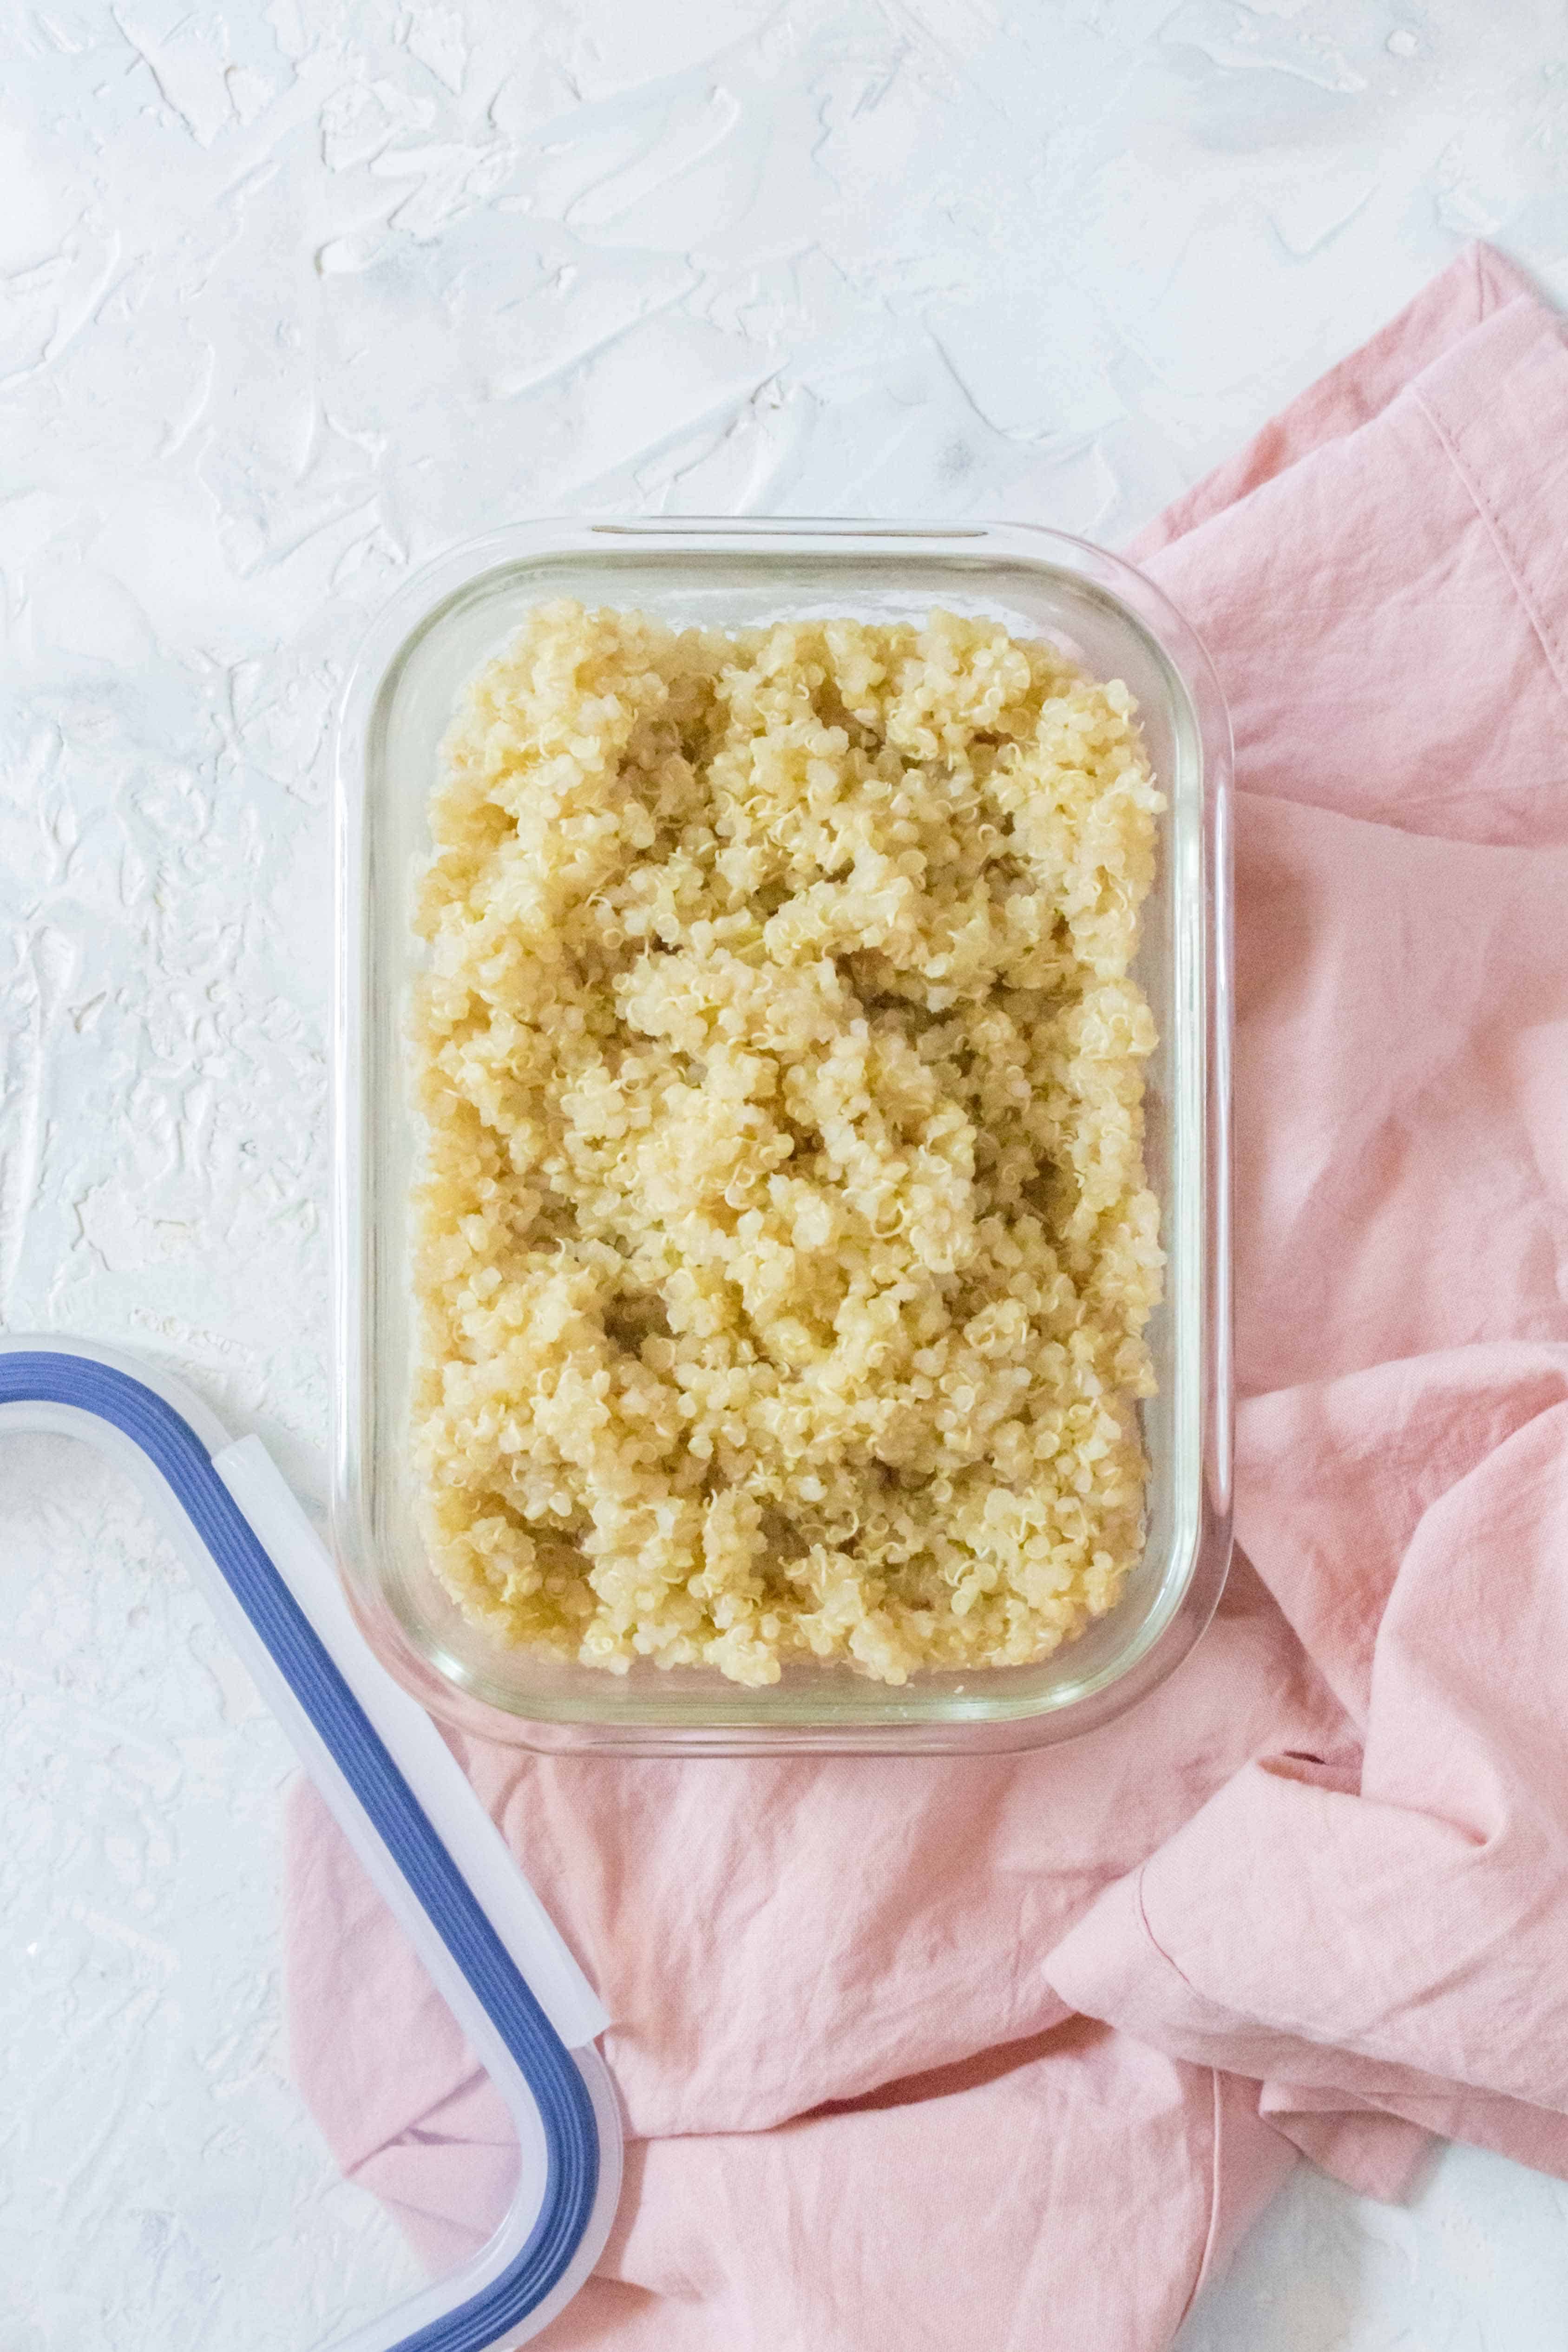 How to meal prep and freeze quinoa